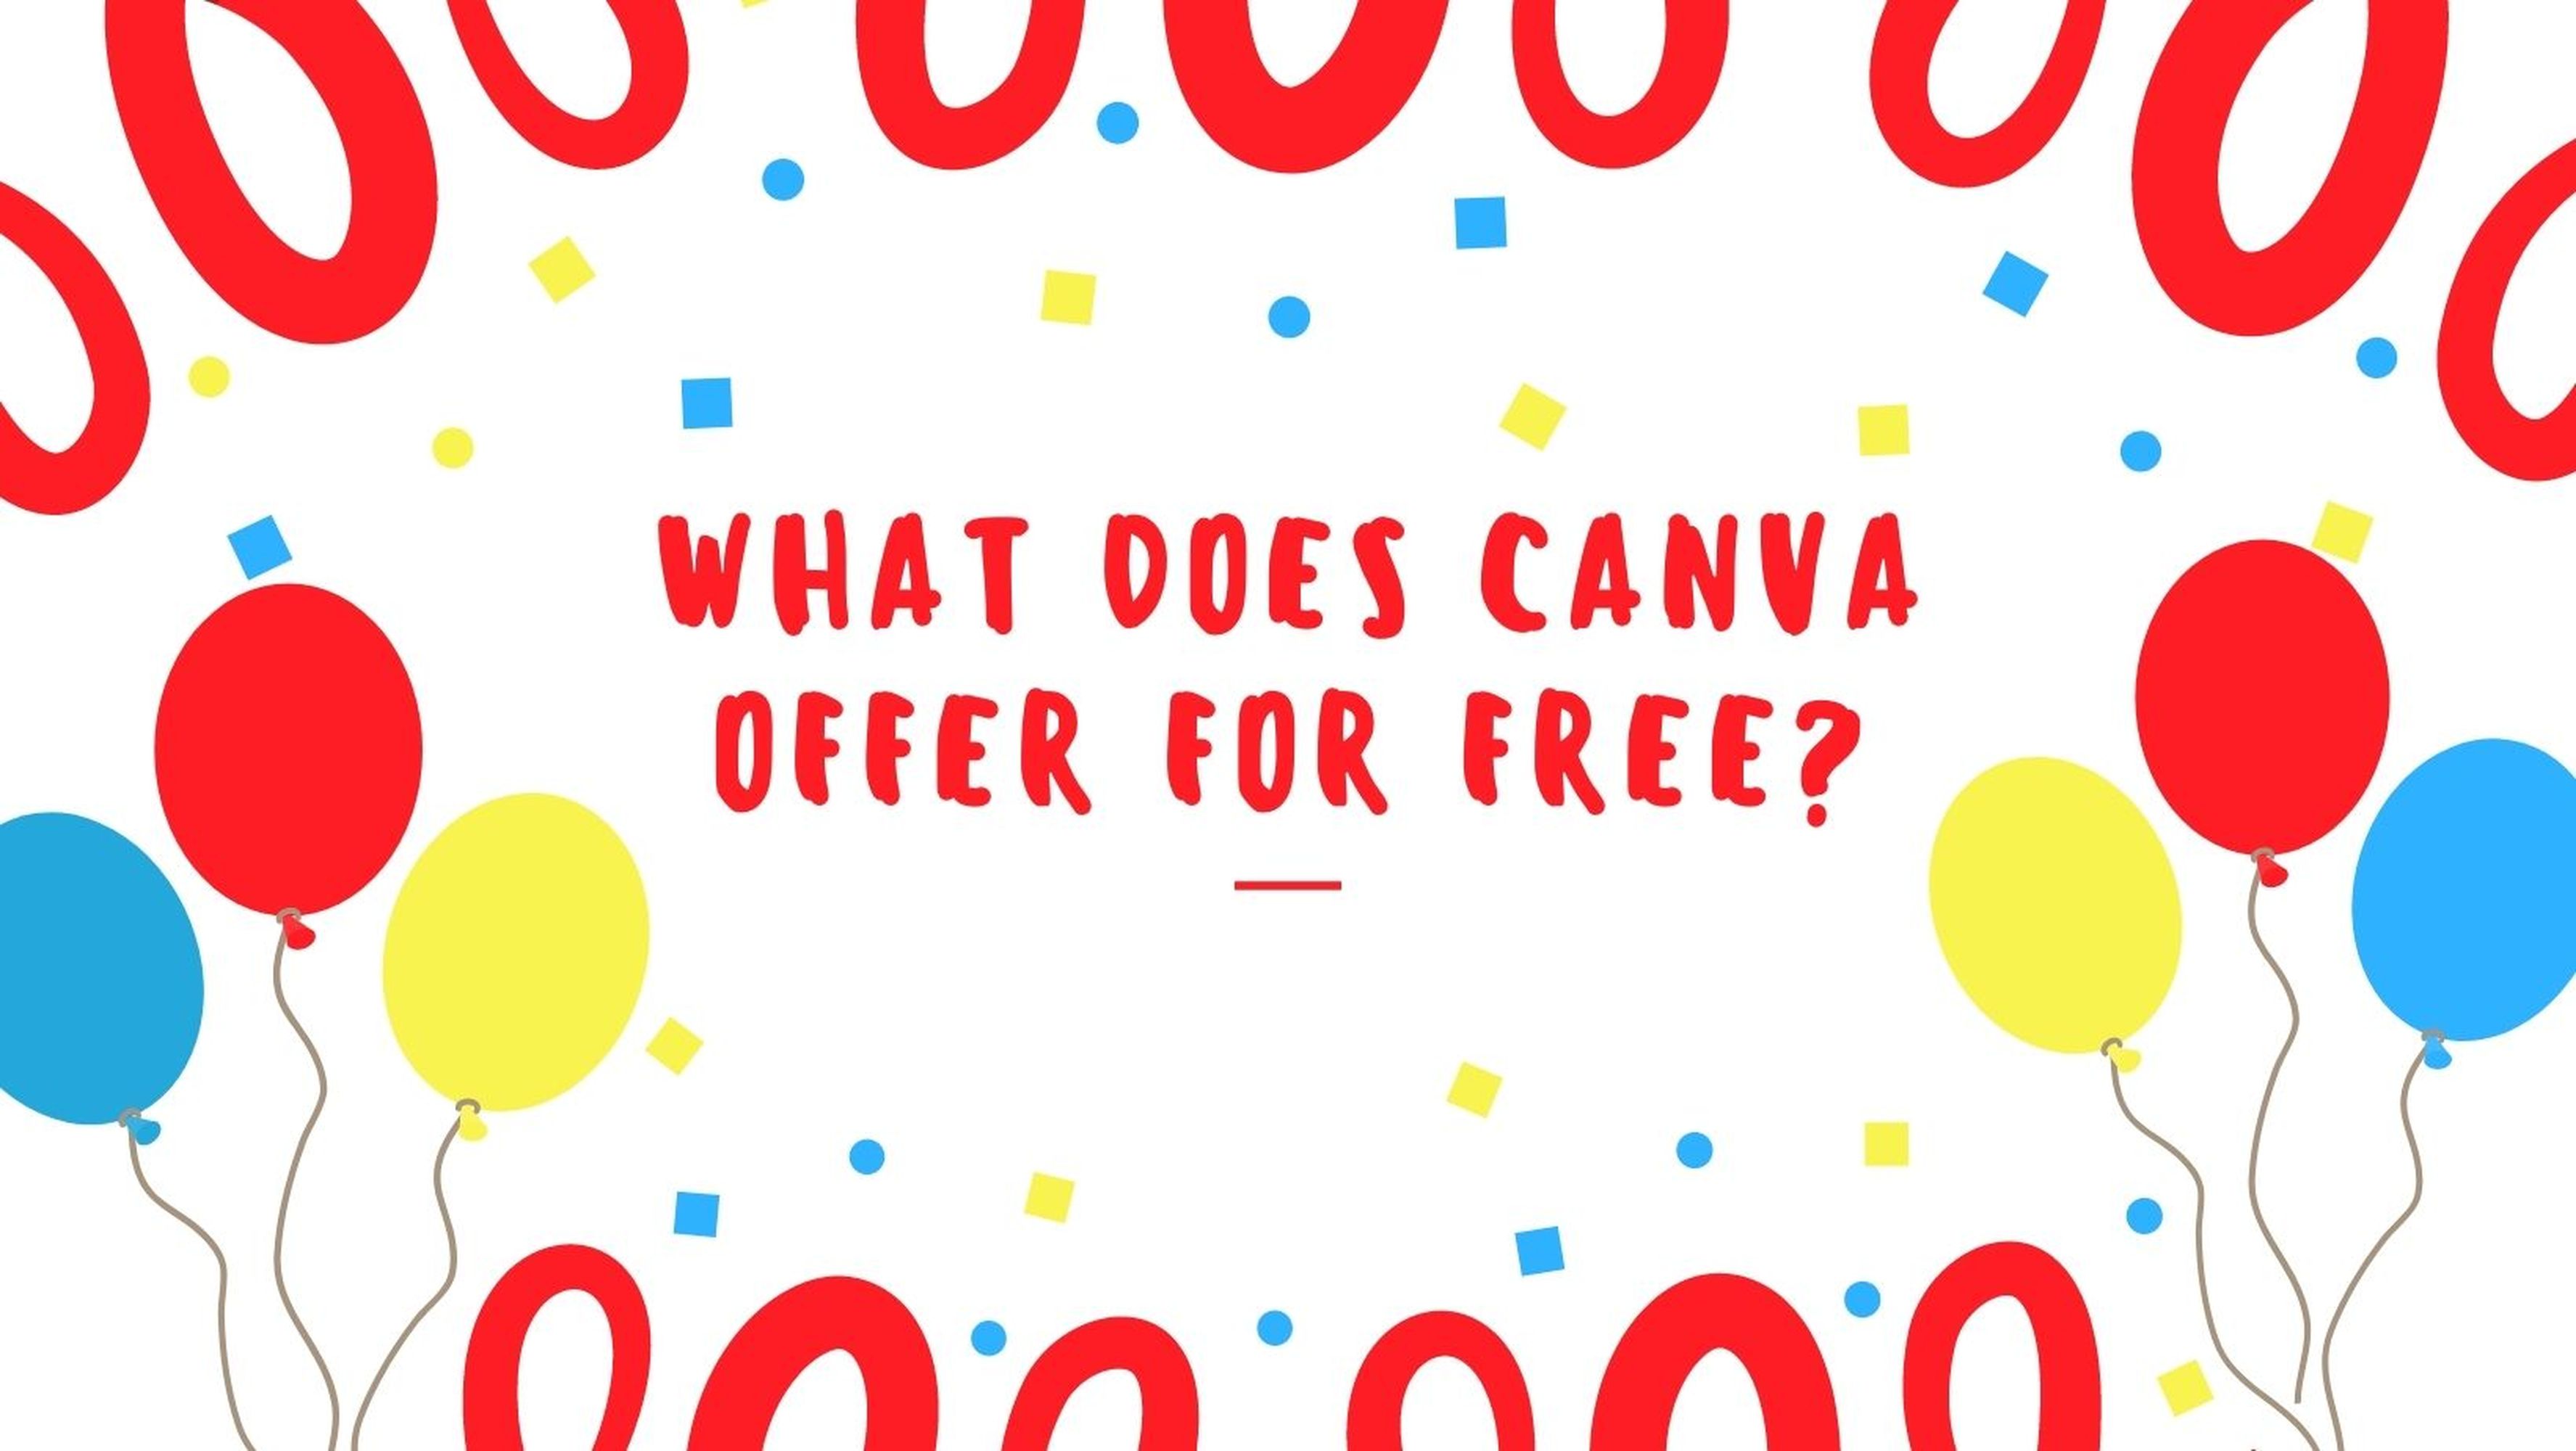 How to use Canva: A simple guide to the graphic design platform